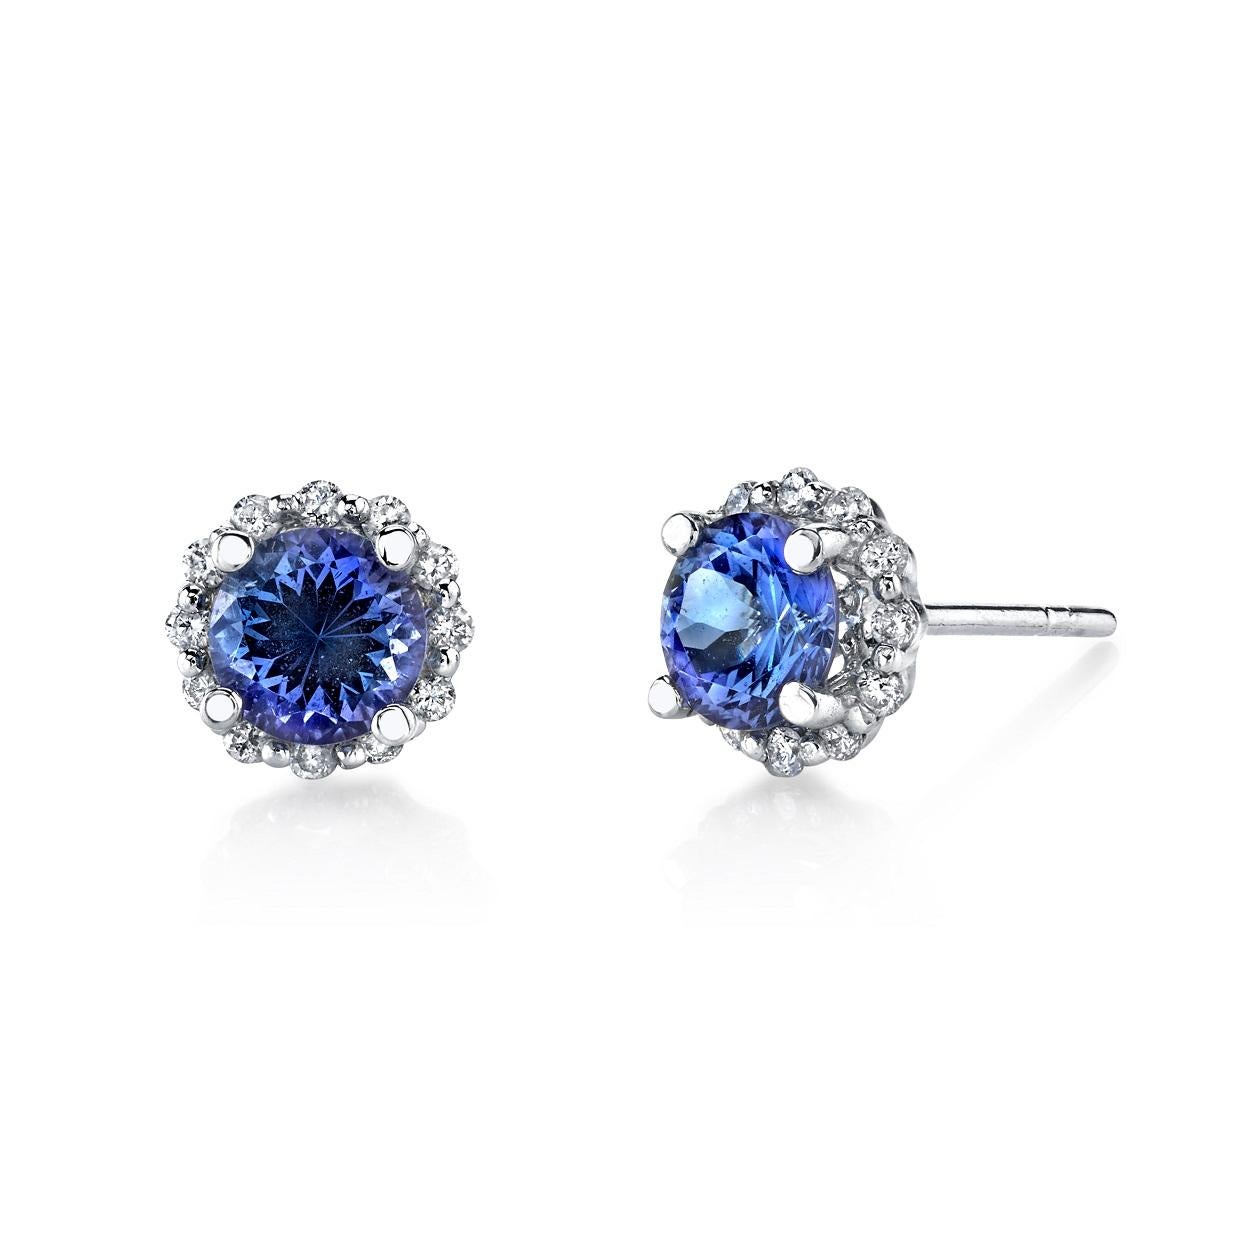 This classic pair of stud earrings features brilliant faceted tanzanite rounds weighing 1.70 carat total. Surrounded by a halo of sparkling diamonds and set in 18k white gold for a refined and timeless look, these jewels are perfect for both day and